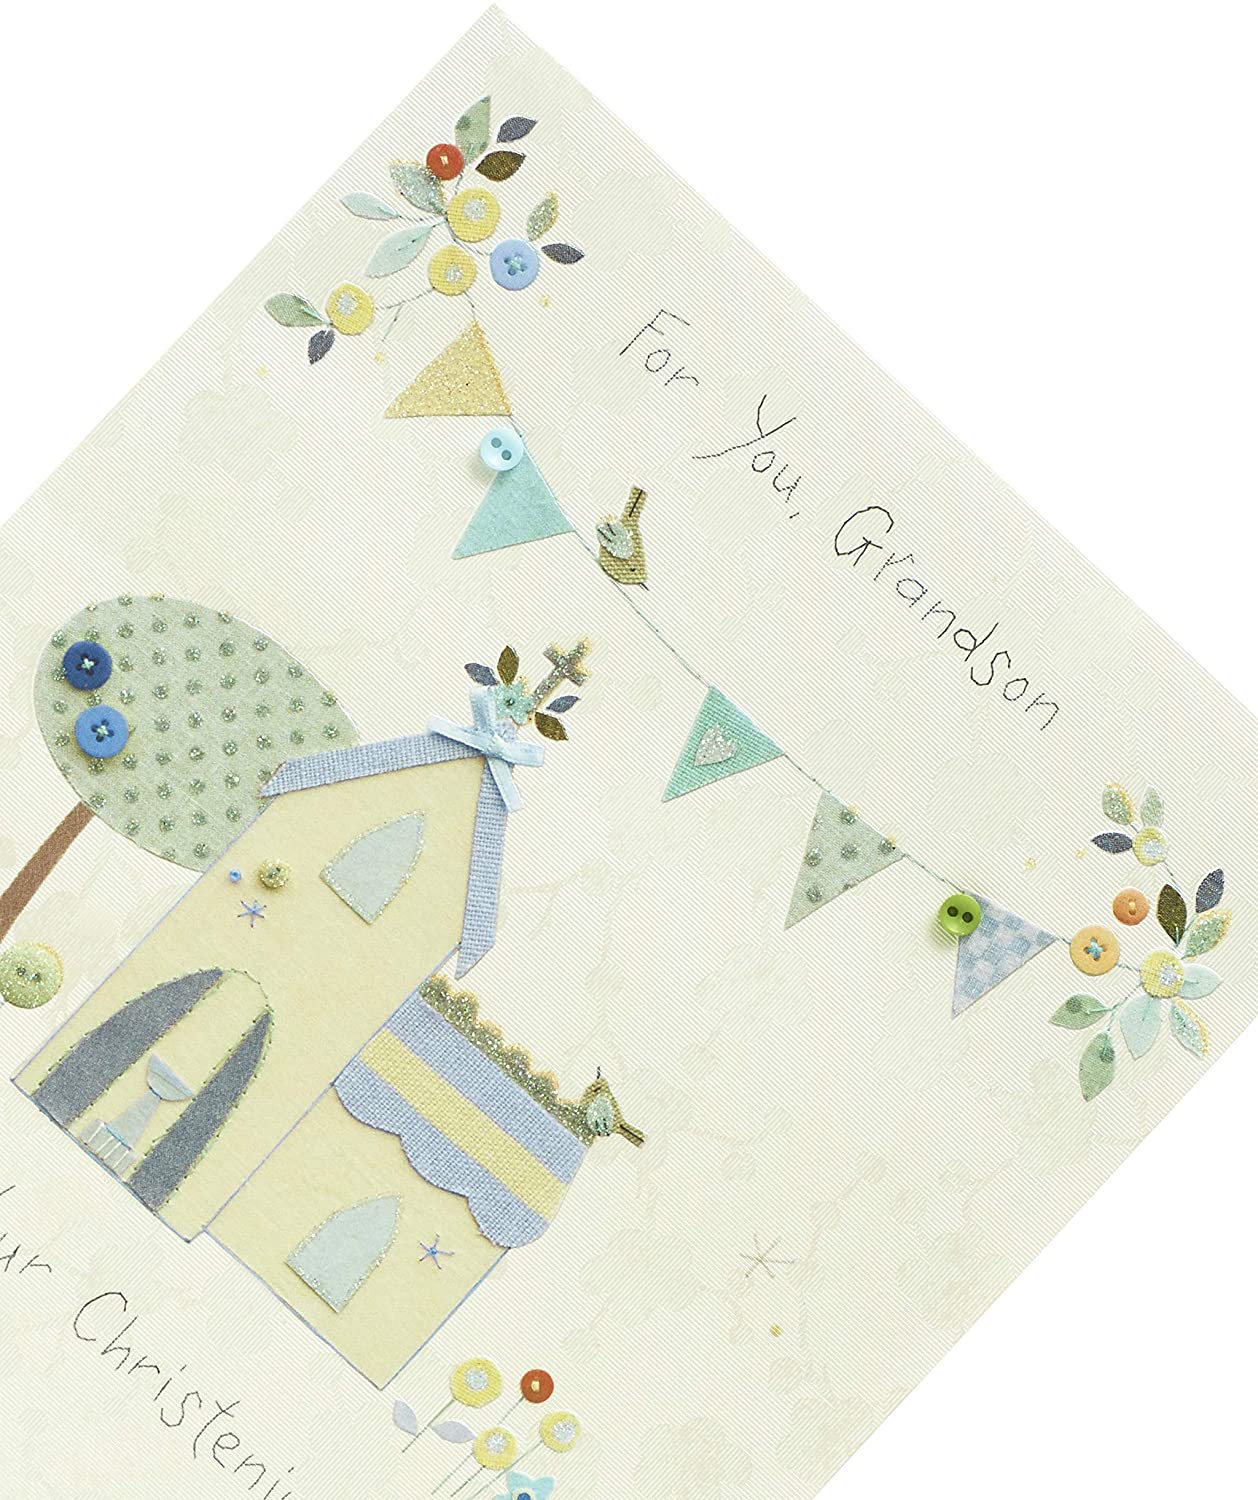 For Grandson On Your Christening Day Card